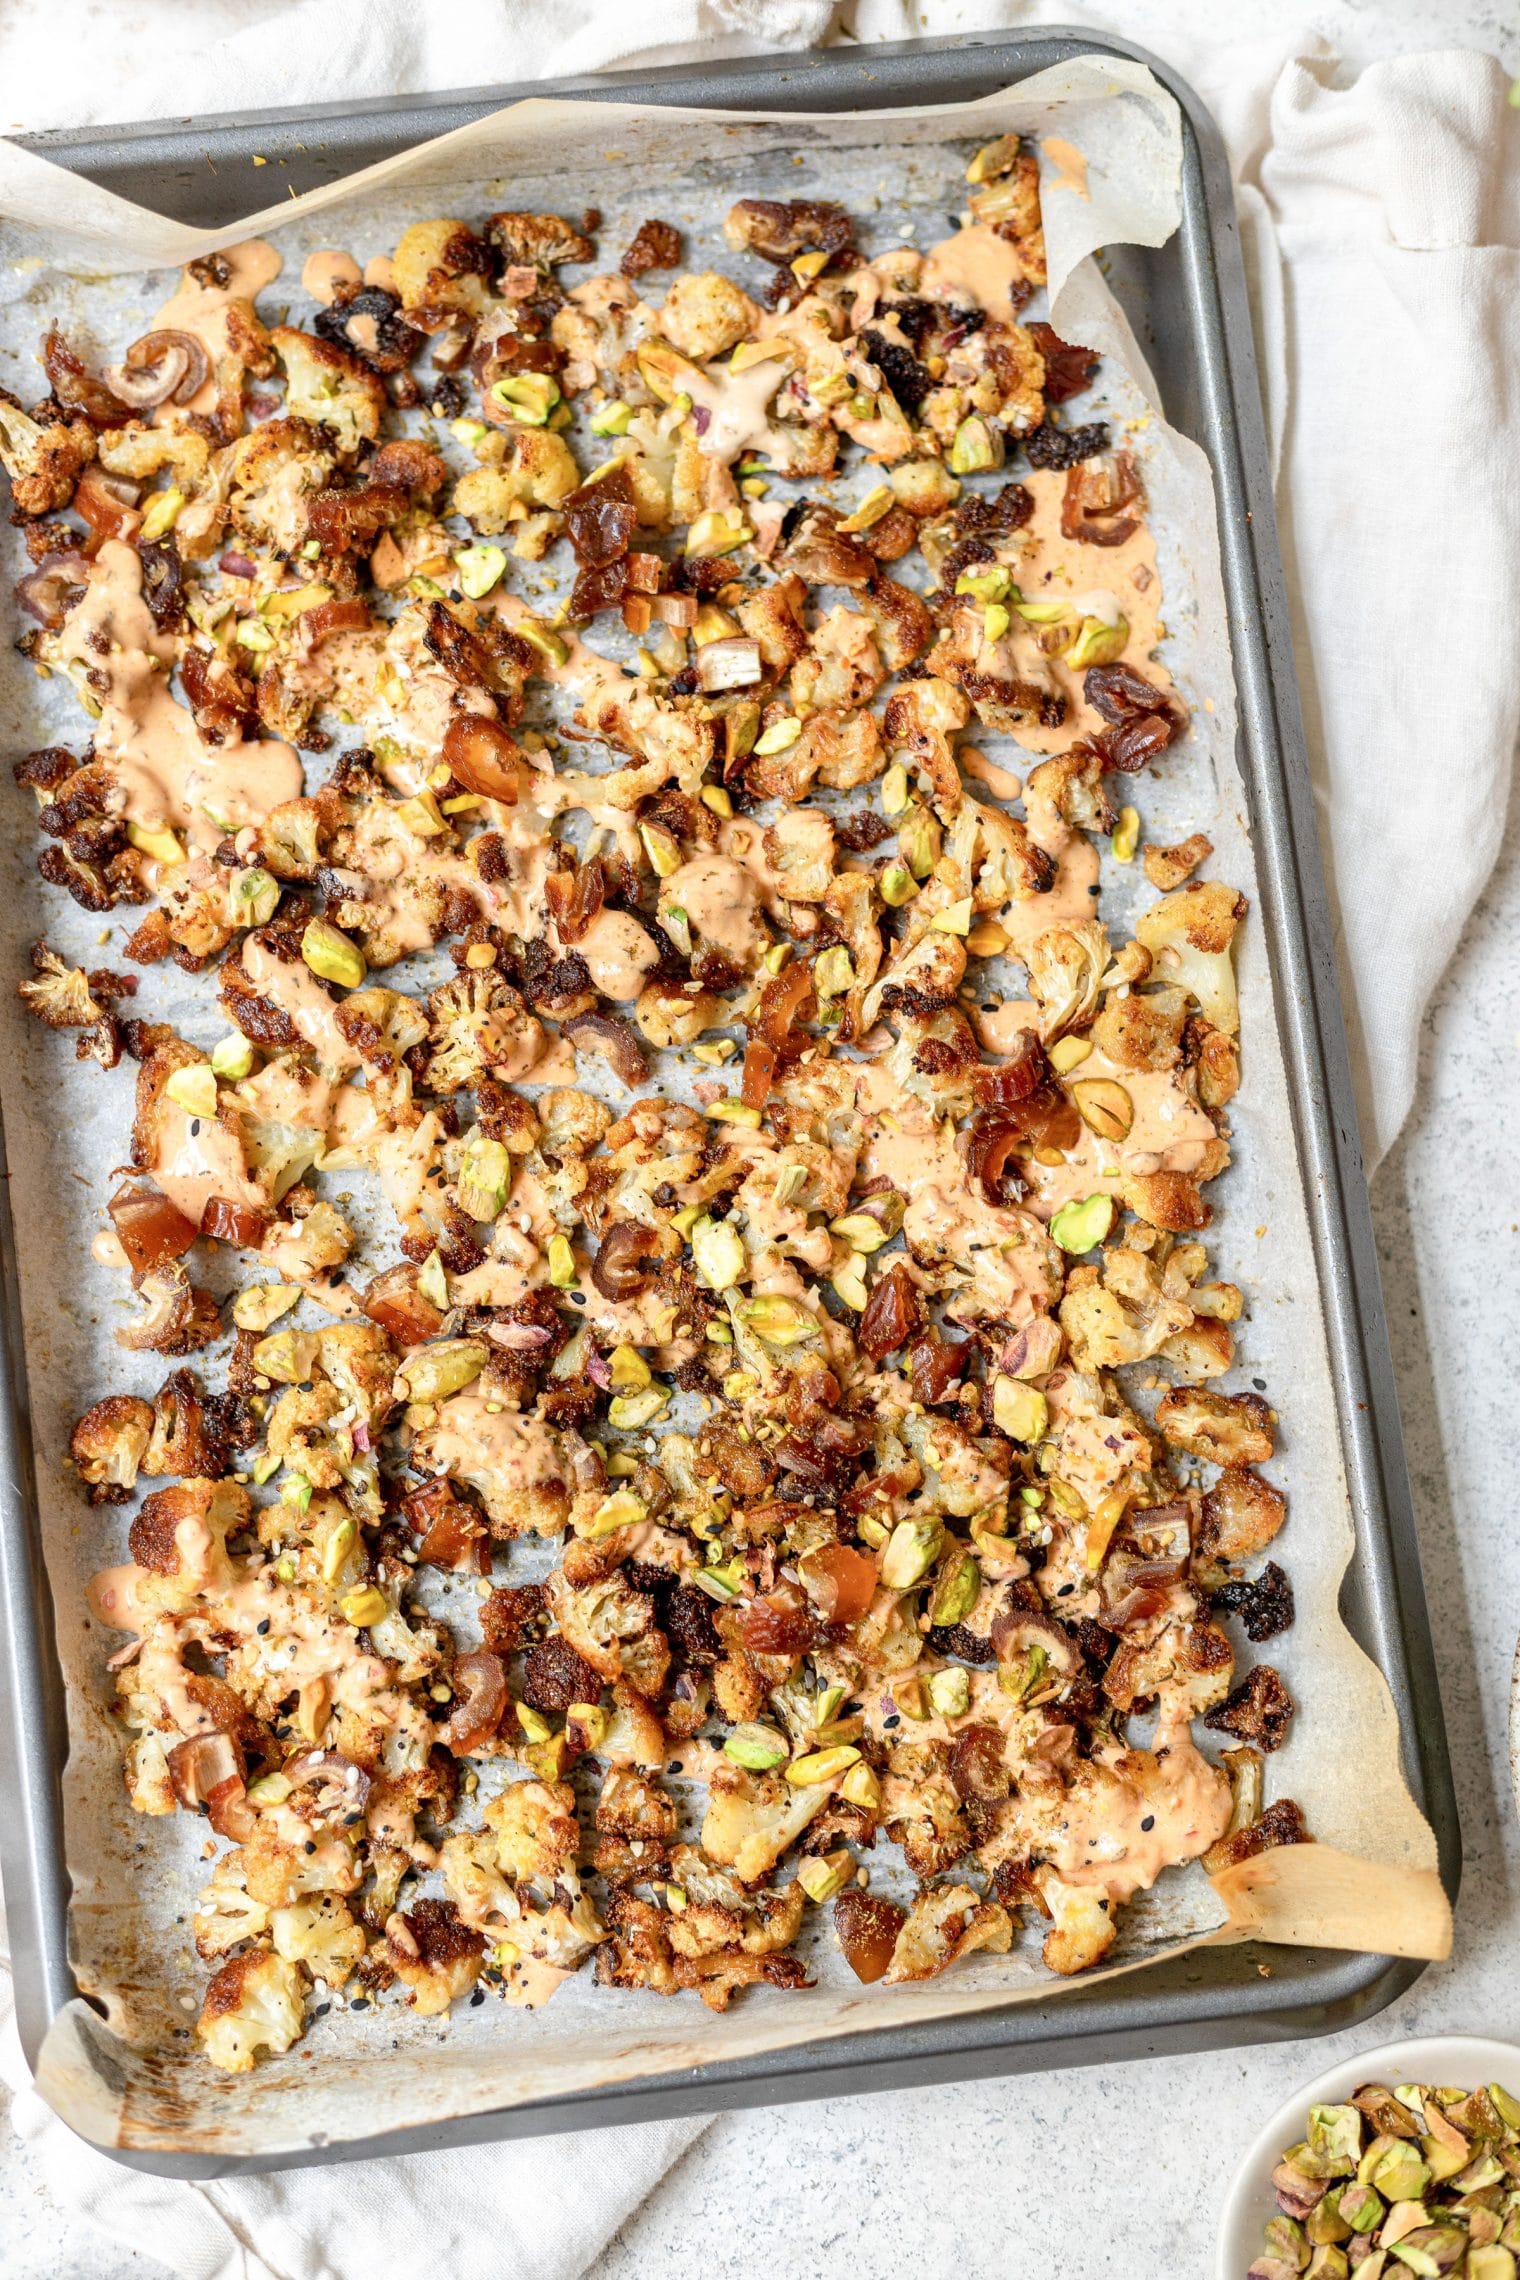 Cauliflower on a baking sheet on a white background. The cauliflower is drizzled with tahini harissa sauce, and topped with pistachios and Medjool dates.